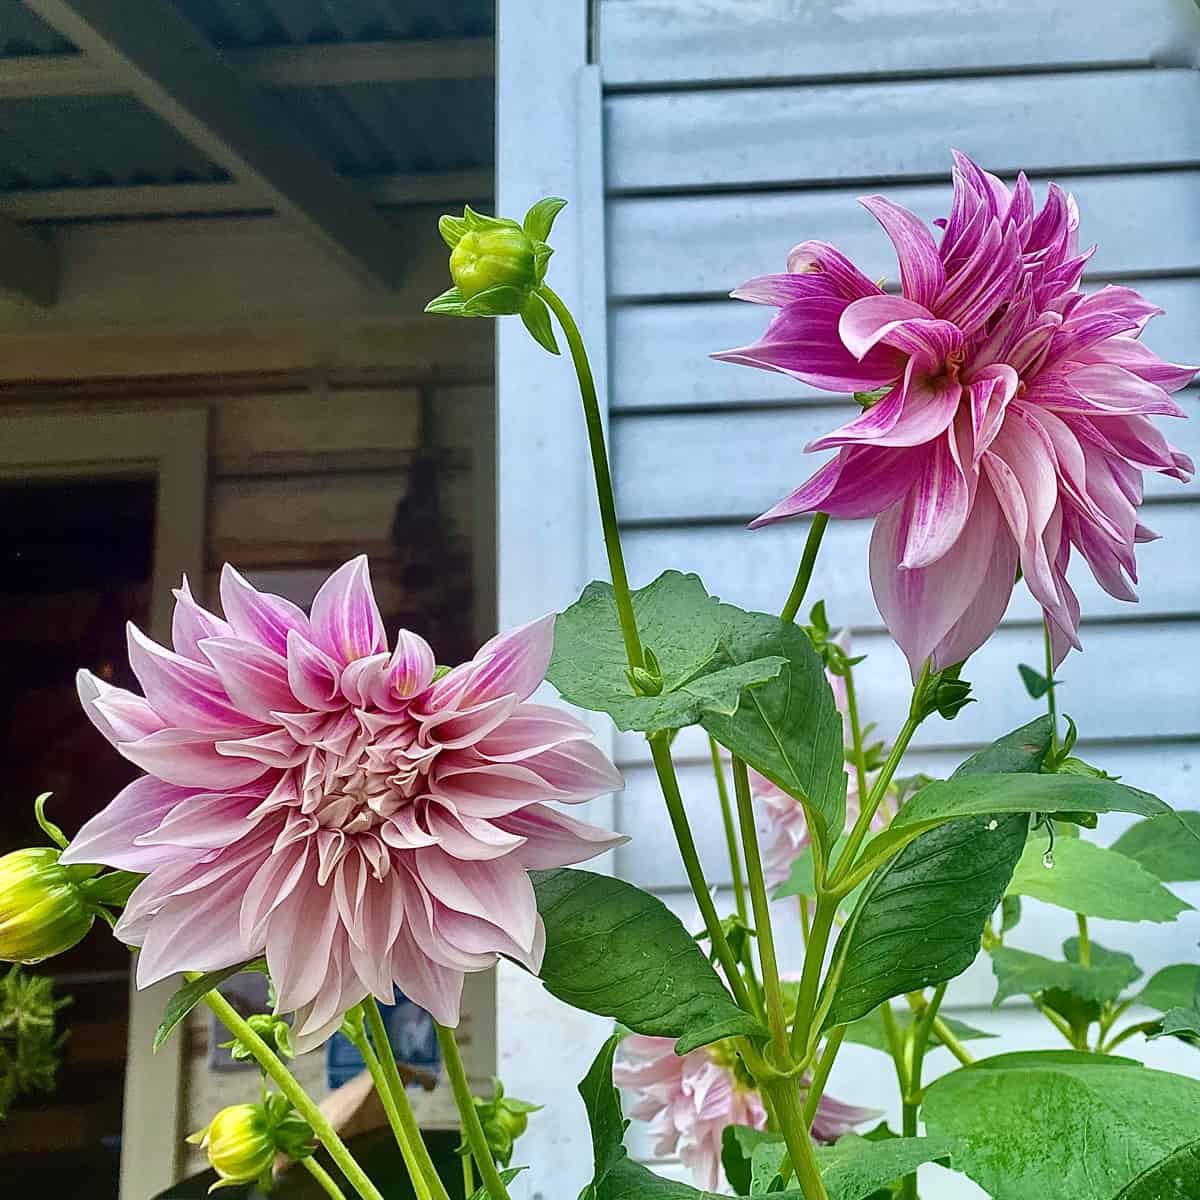 Horizontal close up of bright pink dahlia flowers and buds in Australian flowerbed against white wood wall in bloom with green leaves